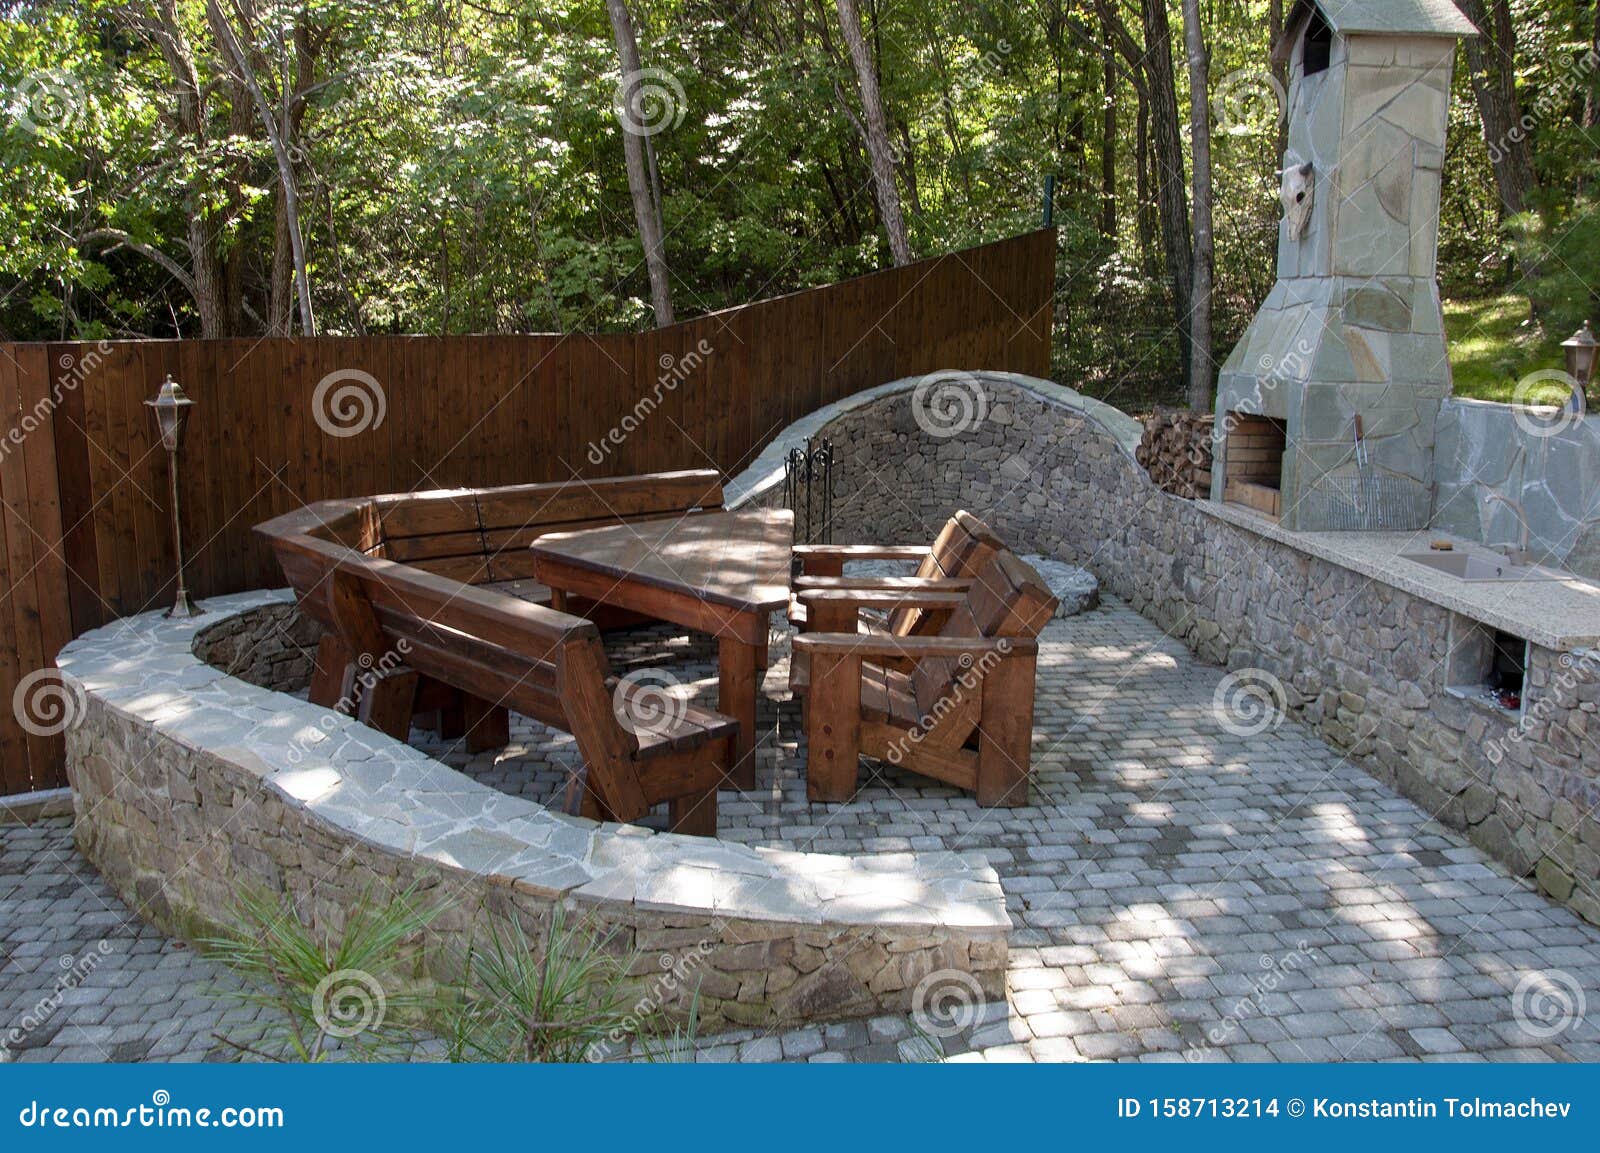 Country House Ideas for the Design of the Site Architecture of the Barbecue  Area Stock Photo - Image of barbeque, color: 158713214